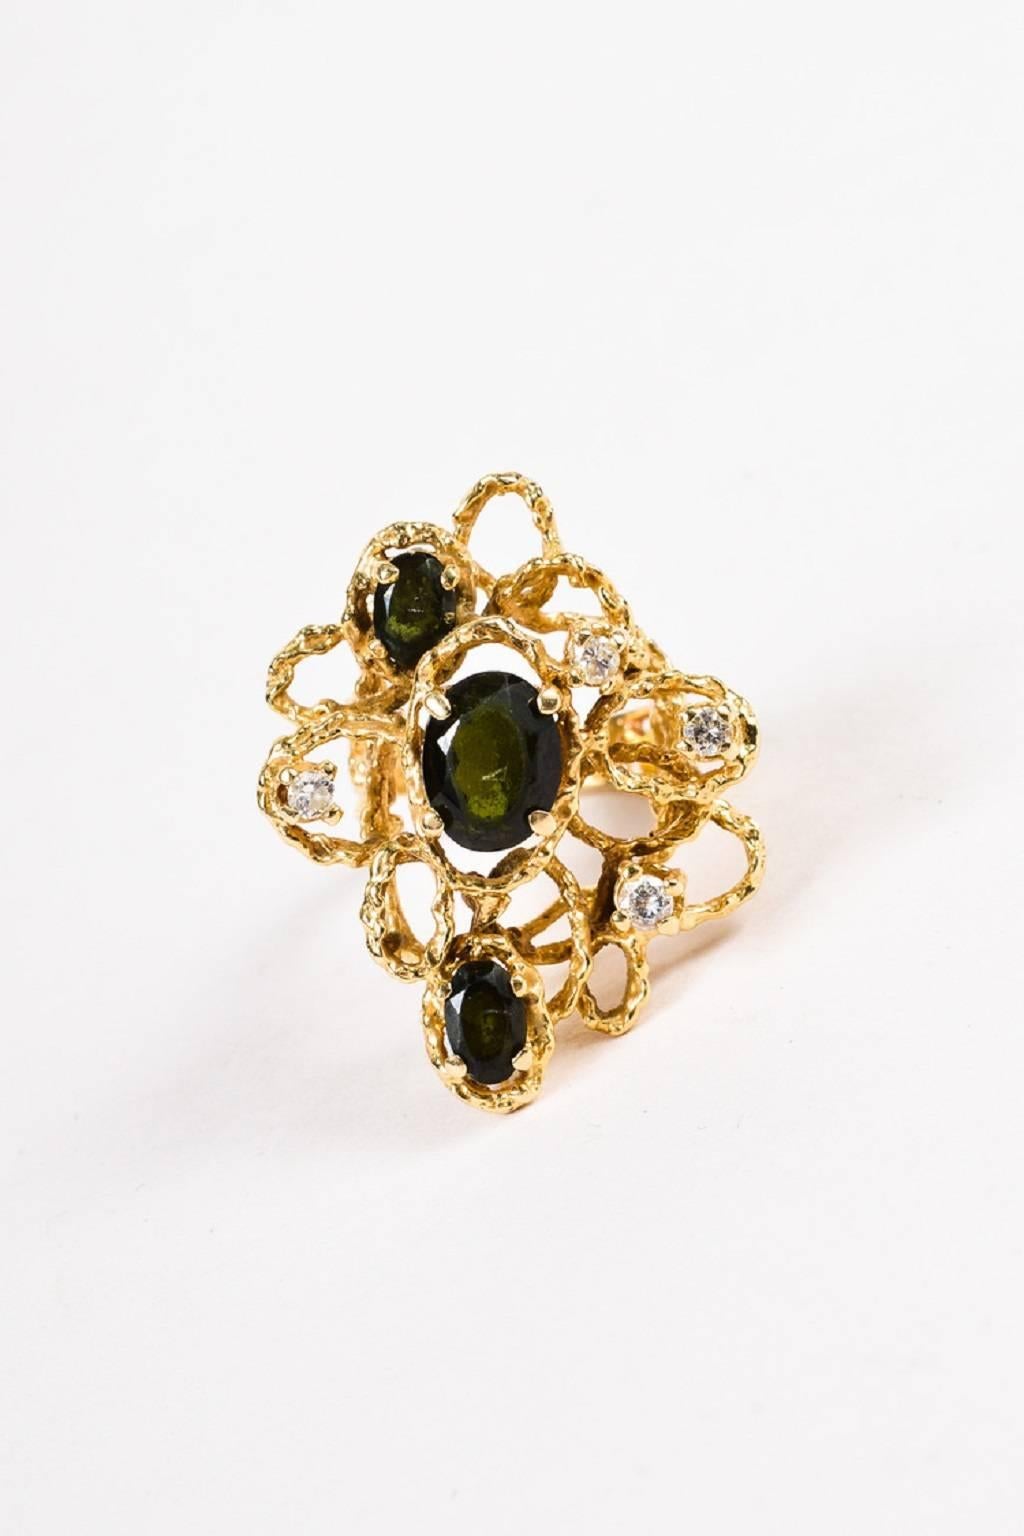 Size: 5.5
Color: Gold,Green,
Made In: Unknown.
Fabric Content: 14K Yellow Gold, Green Tourmaline, Diamond
Item Specifics & Details: Unique cocktail ring that oozes vintage elegance. 14K yellow gold construction. Polished finish. Intricate woven